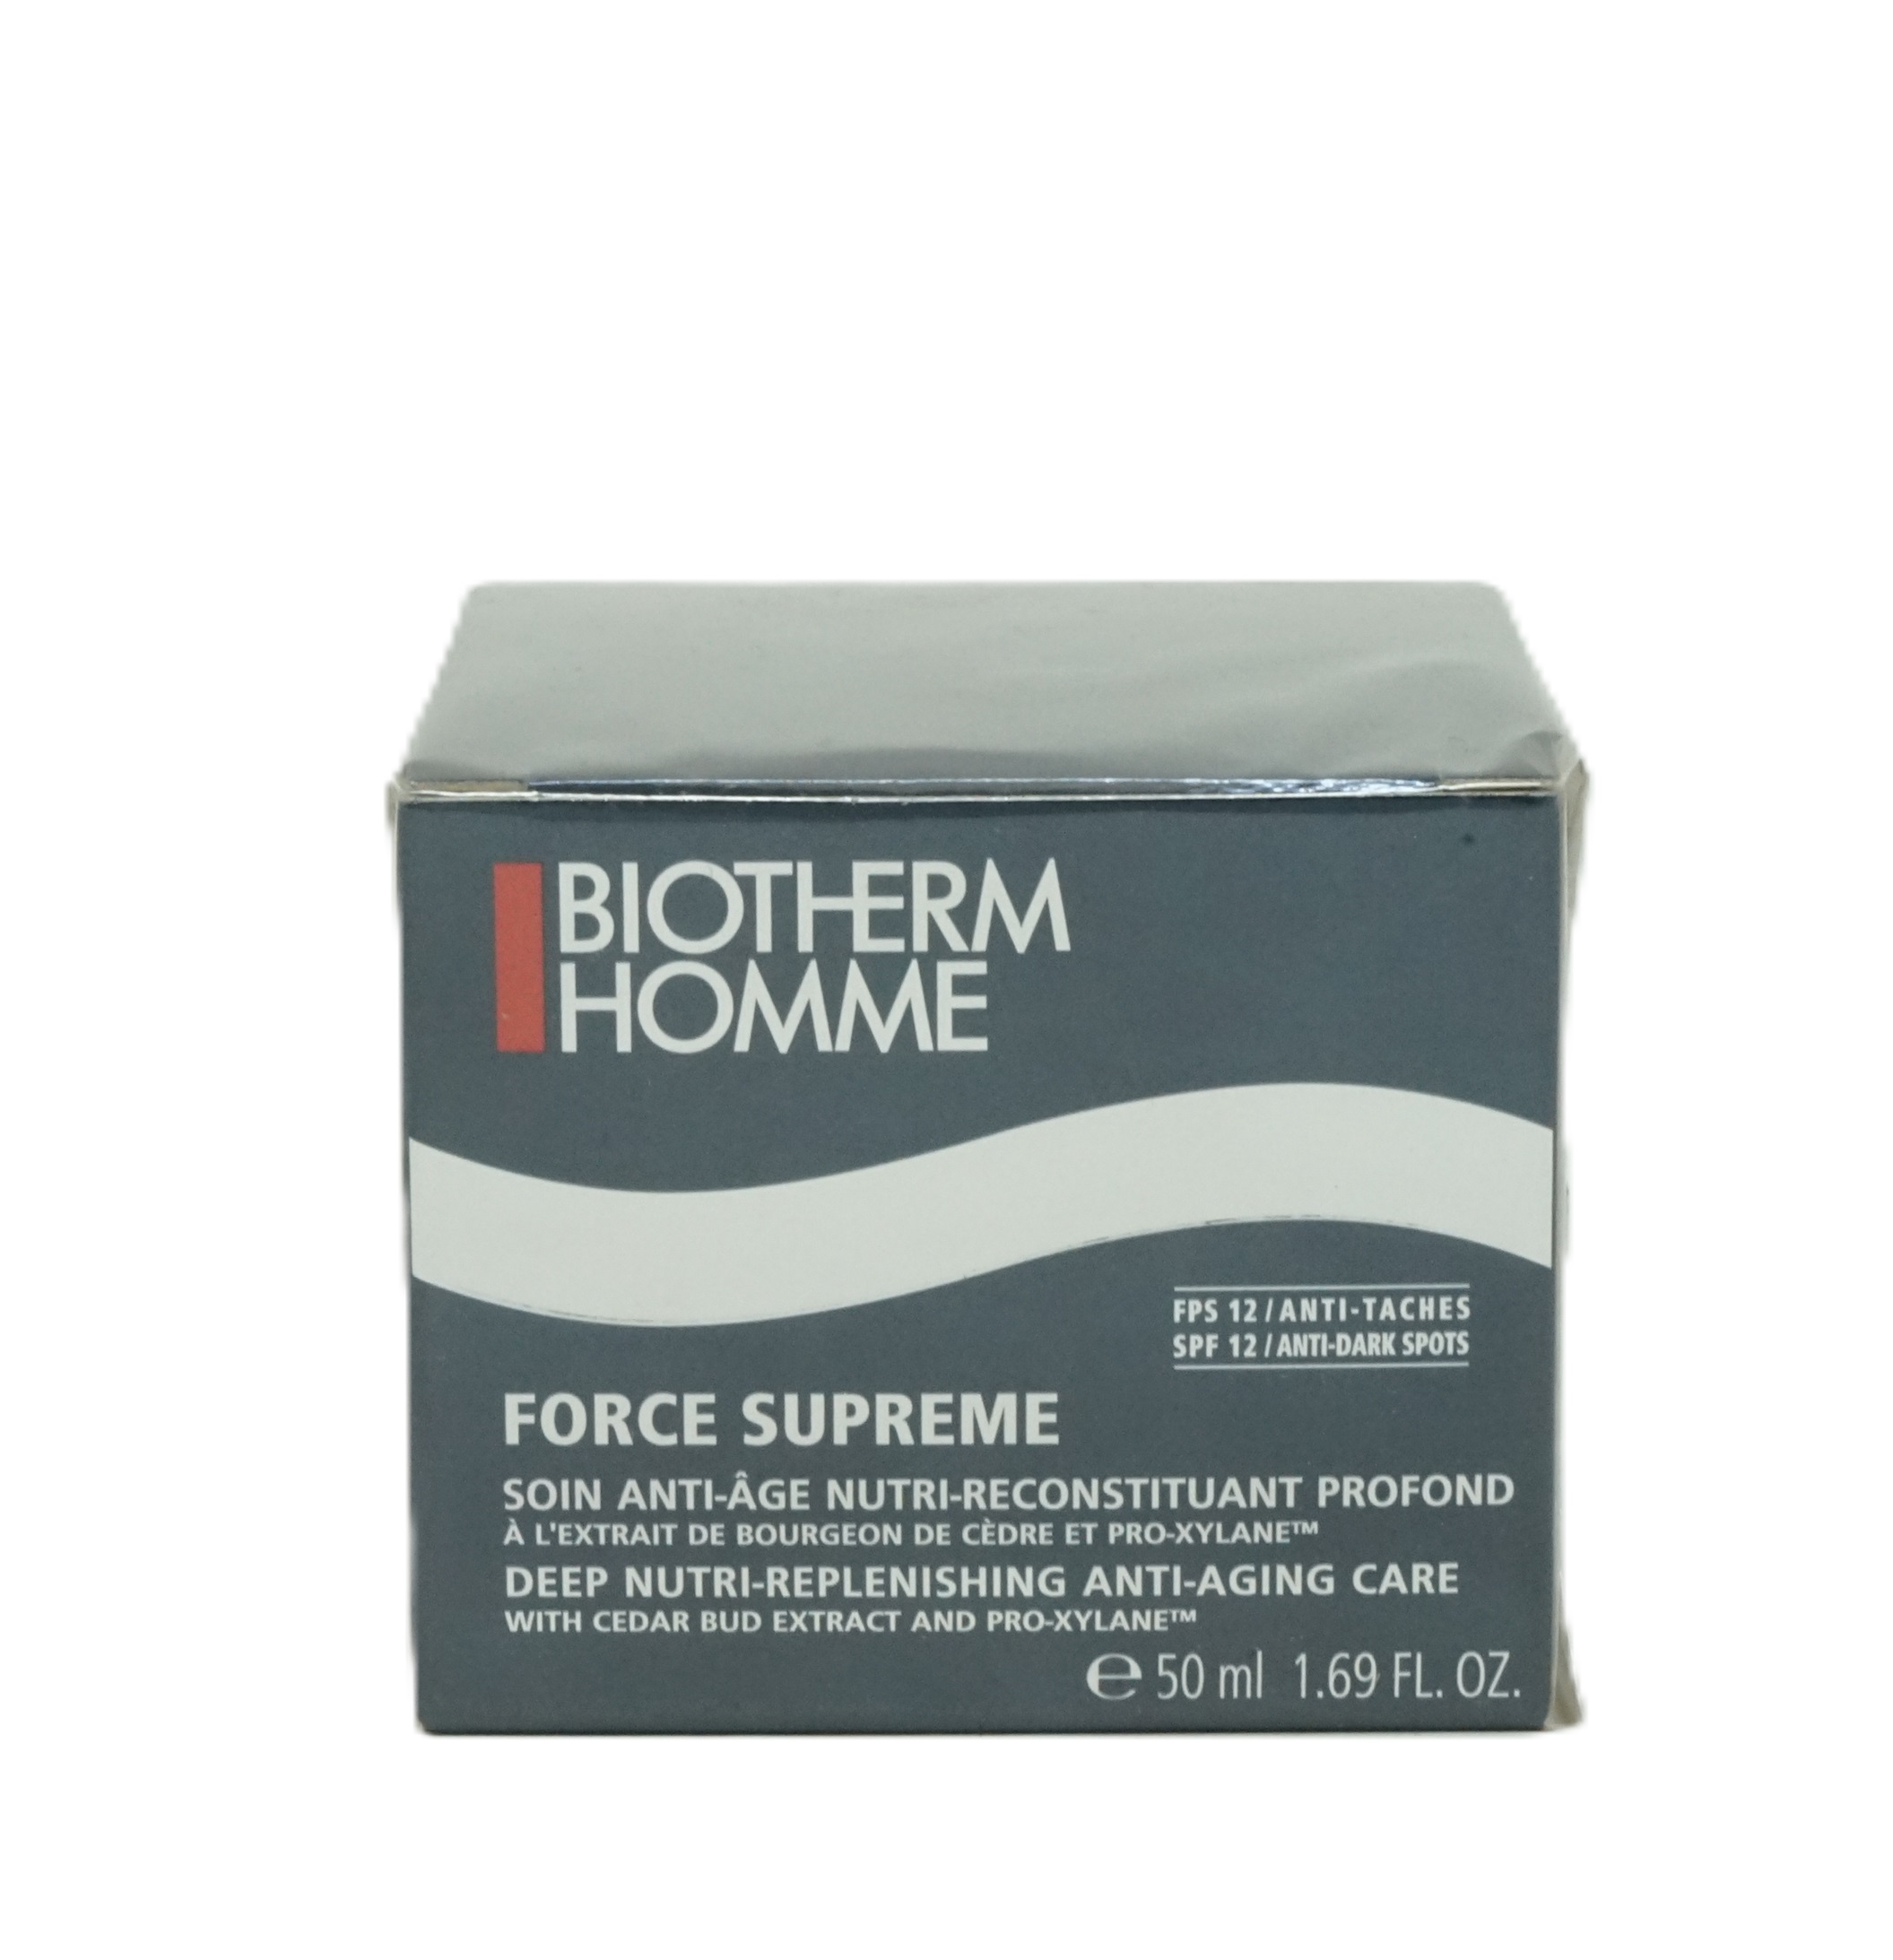 Biotherm Homme Force Supreme deep nutri-replenishing Anti-Aging Care 50ml